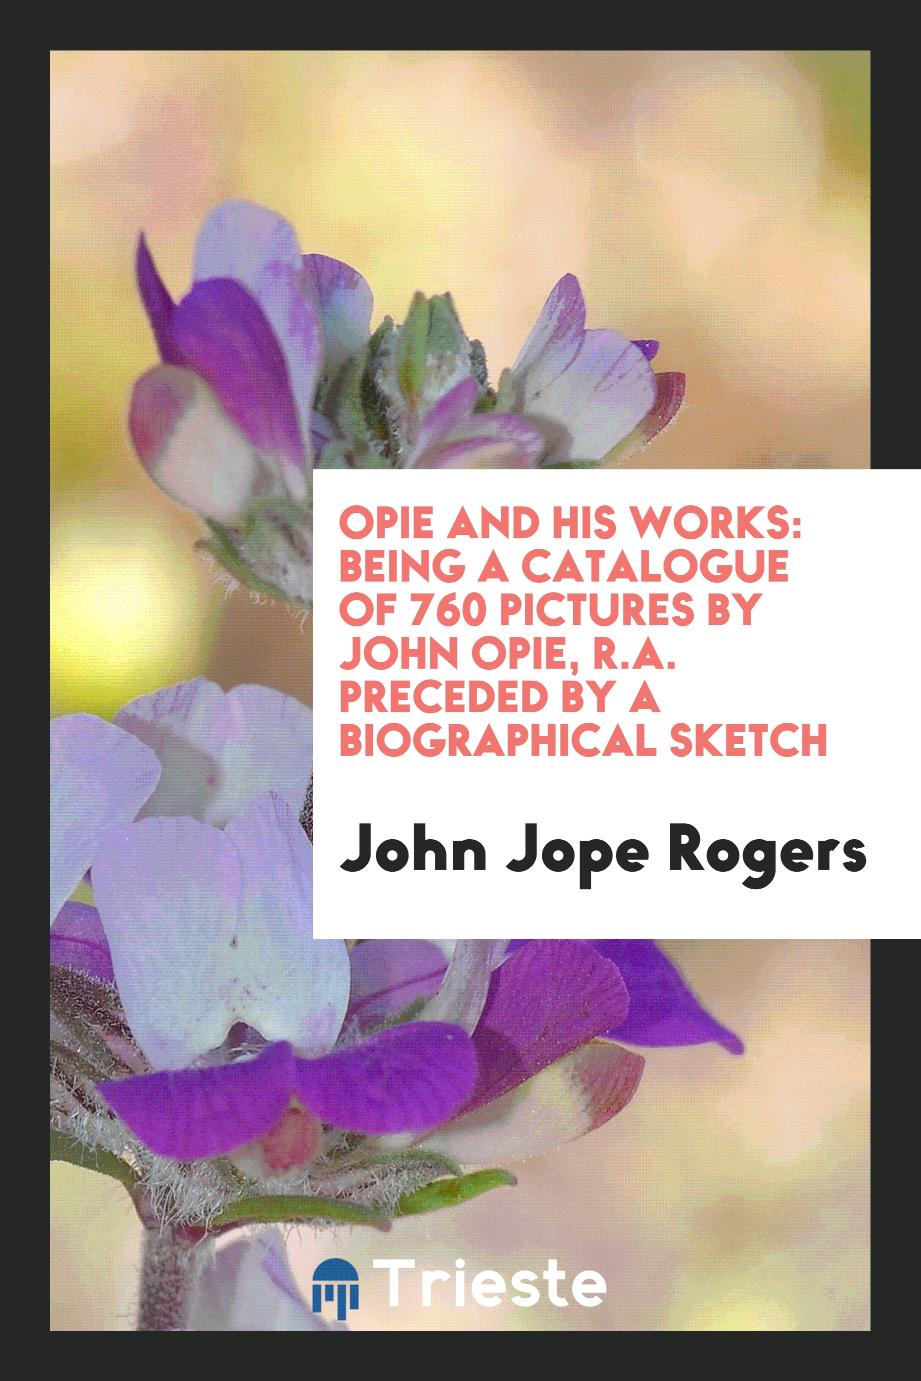 Opie and His Works: Being a Catalogue of 760 Pictures by John Opie, R.A. Preceded by a Biographical Sketch